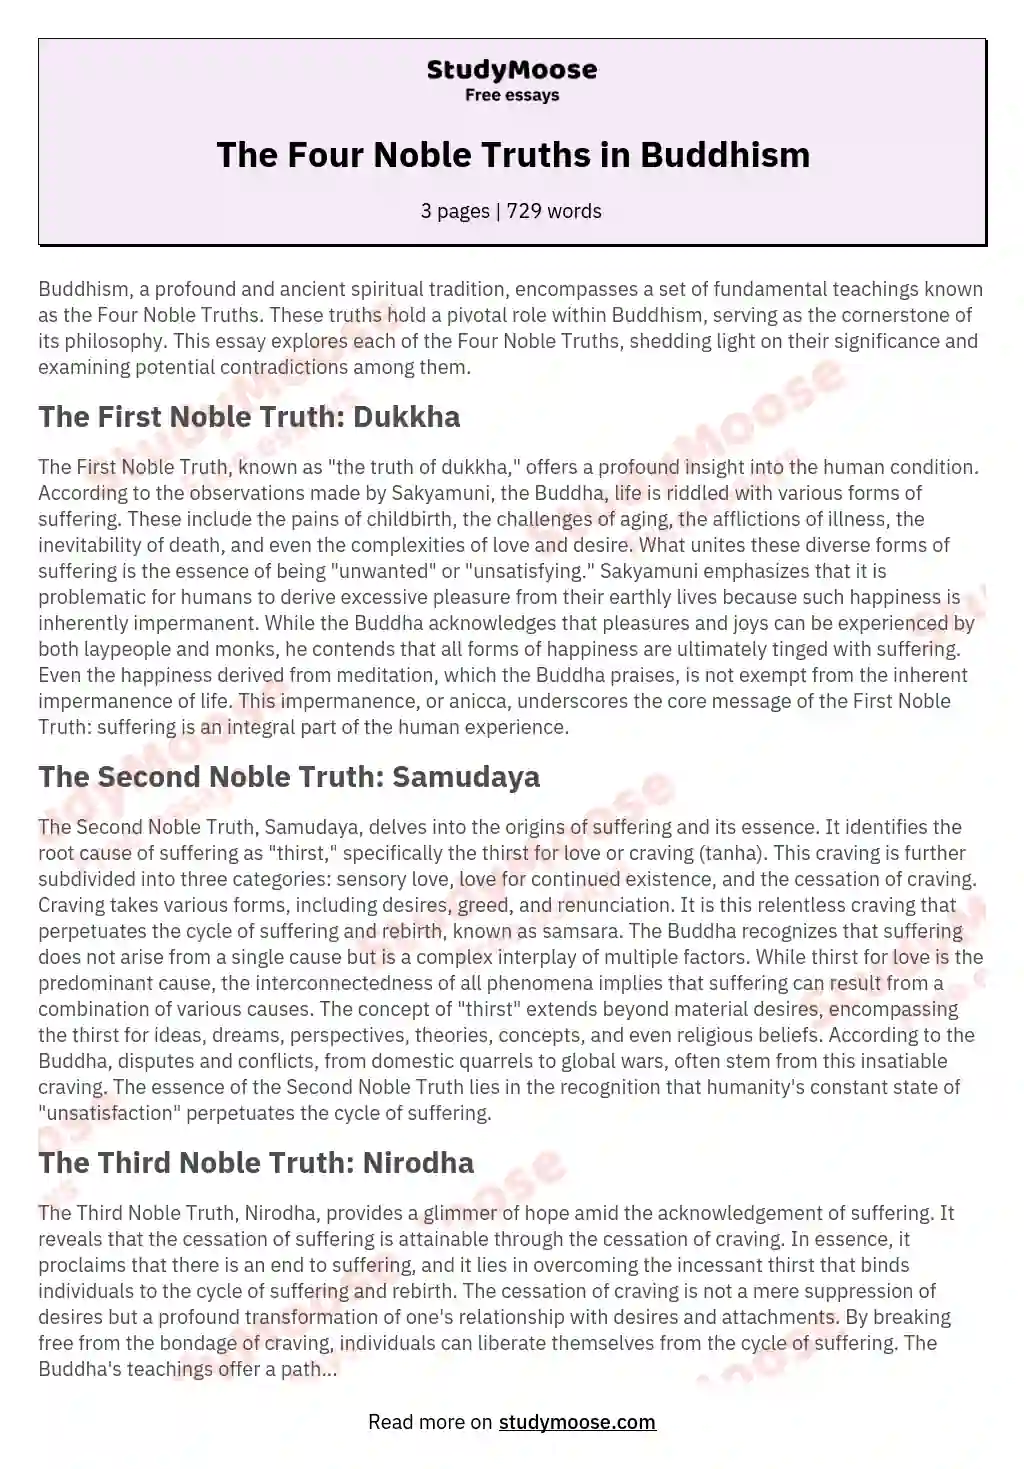 The Four Noble Truths in Buddhism essay